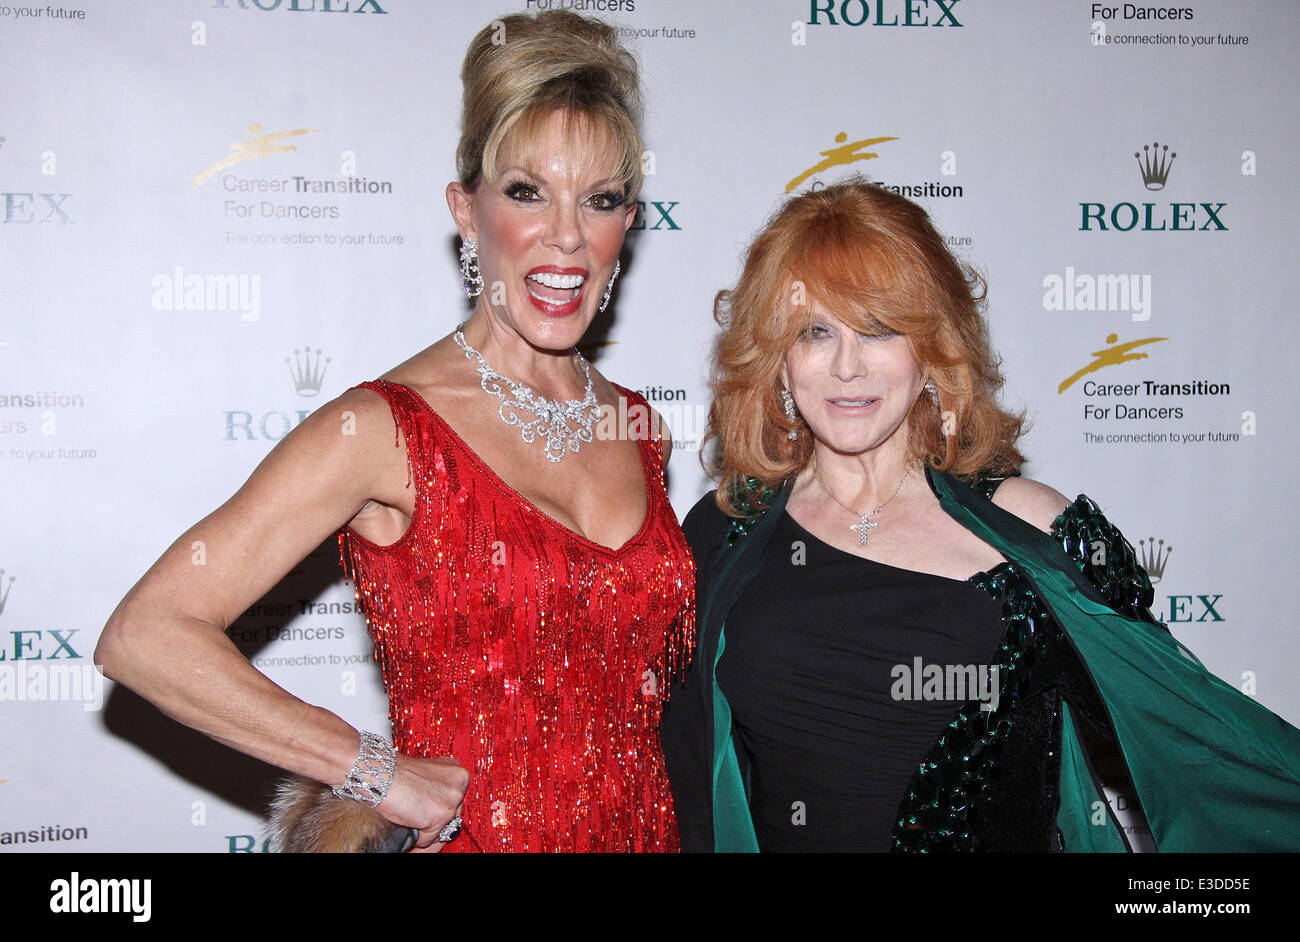 Career Transition For Dancers 28th Anniversary Jubilee Dinner, held at the New York Hilton Midtown Hotel-Arrivals.  Featuring: Michele Riggi,Ann-Margret Where: New York, NY, United States When: 08 Oct 2013 Stock Photo